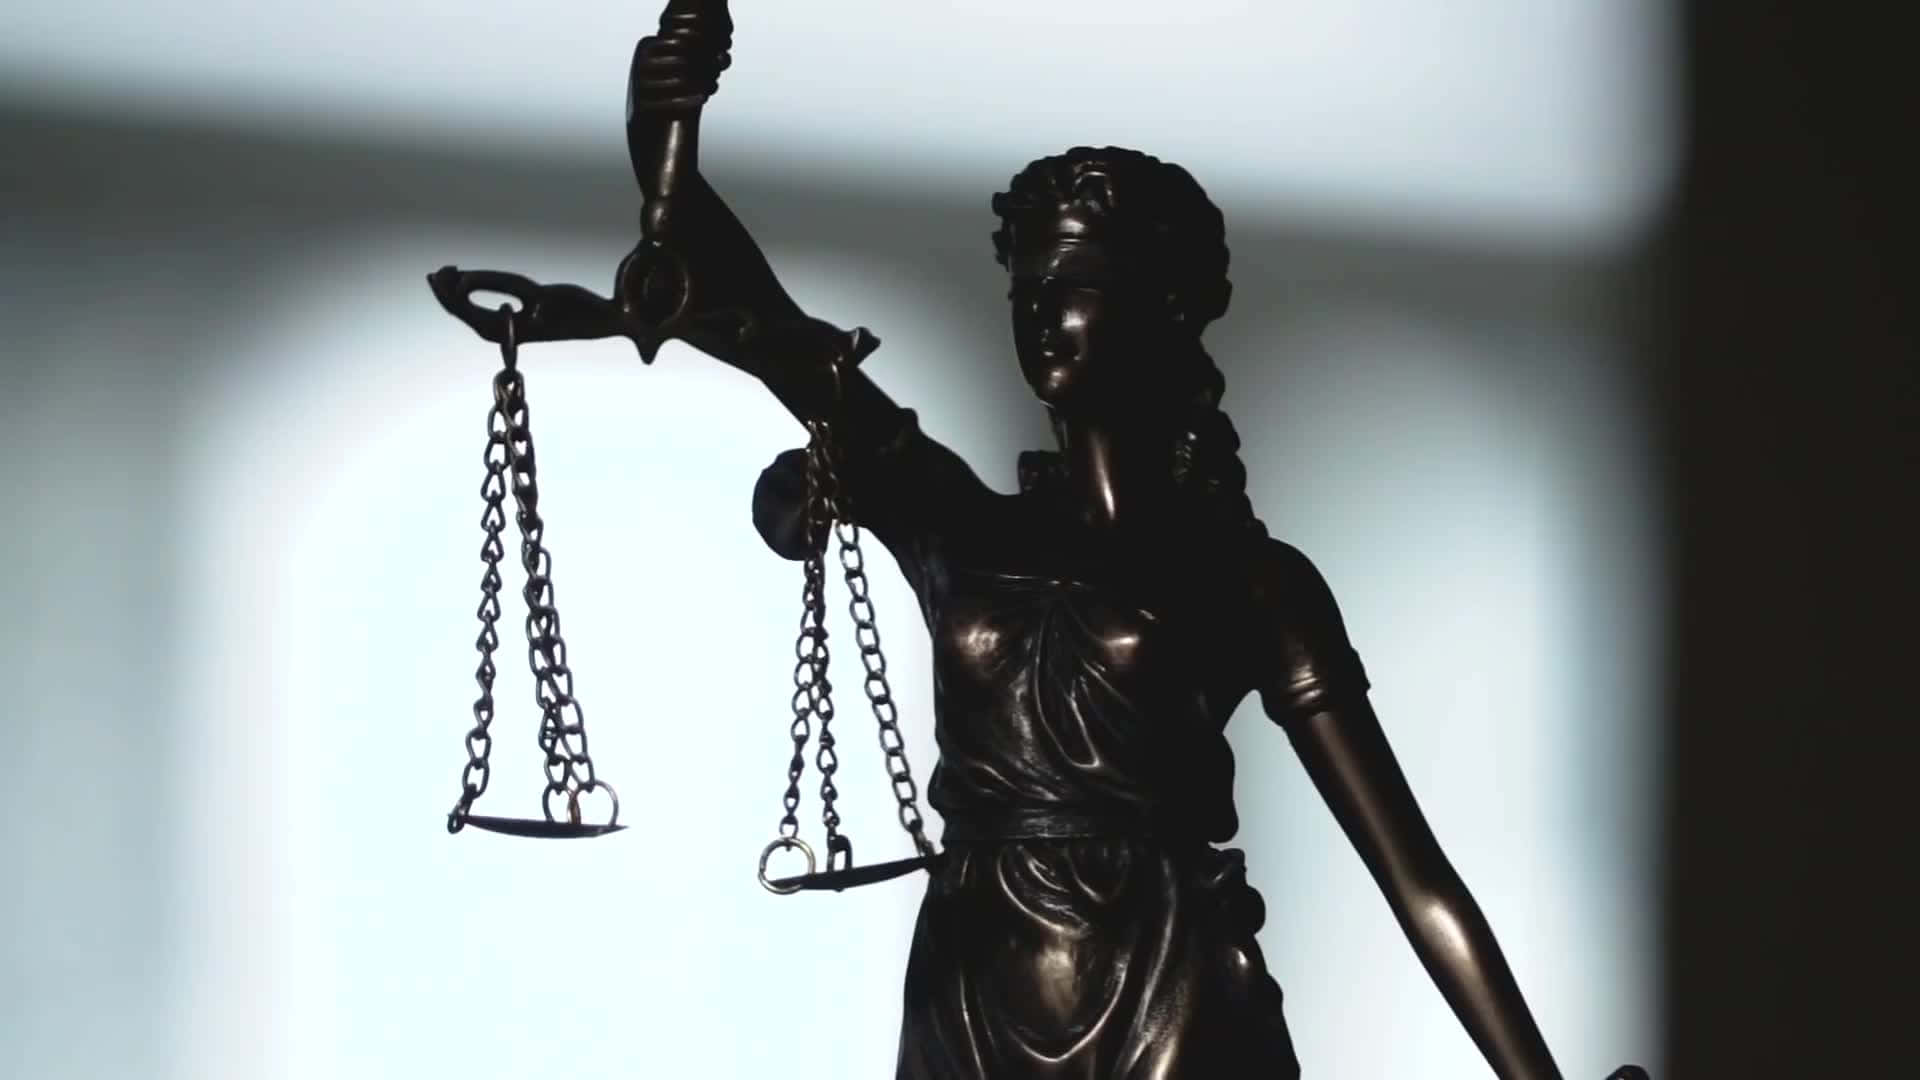 A Statue Of Justice Holding Scales